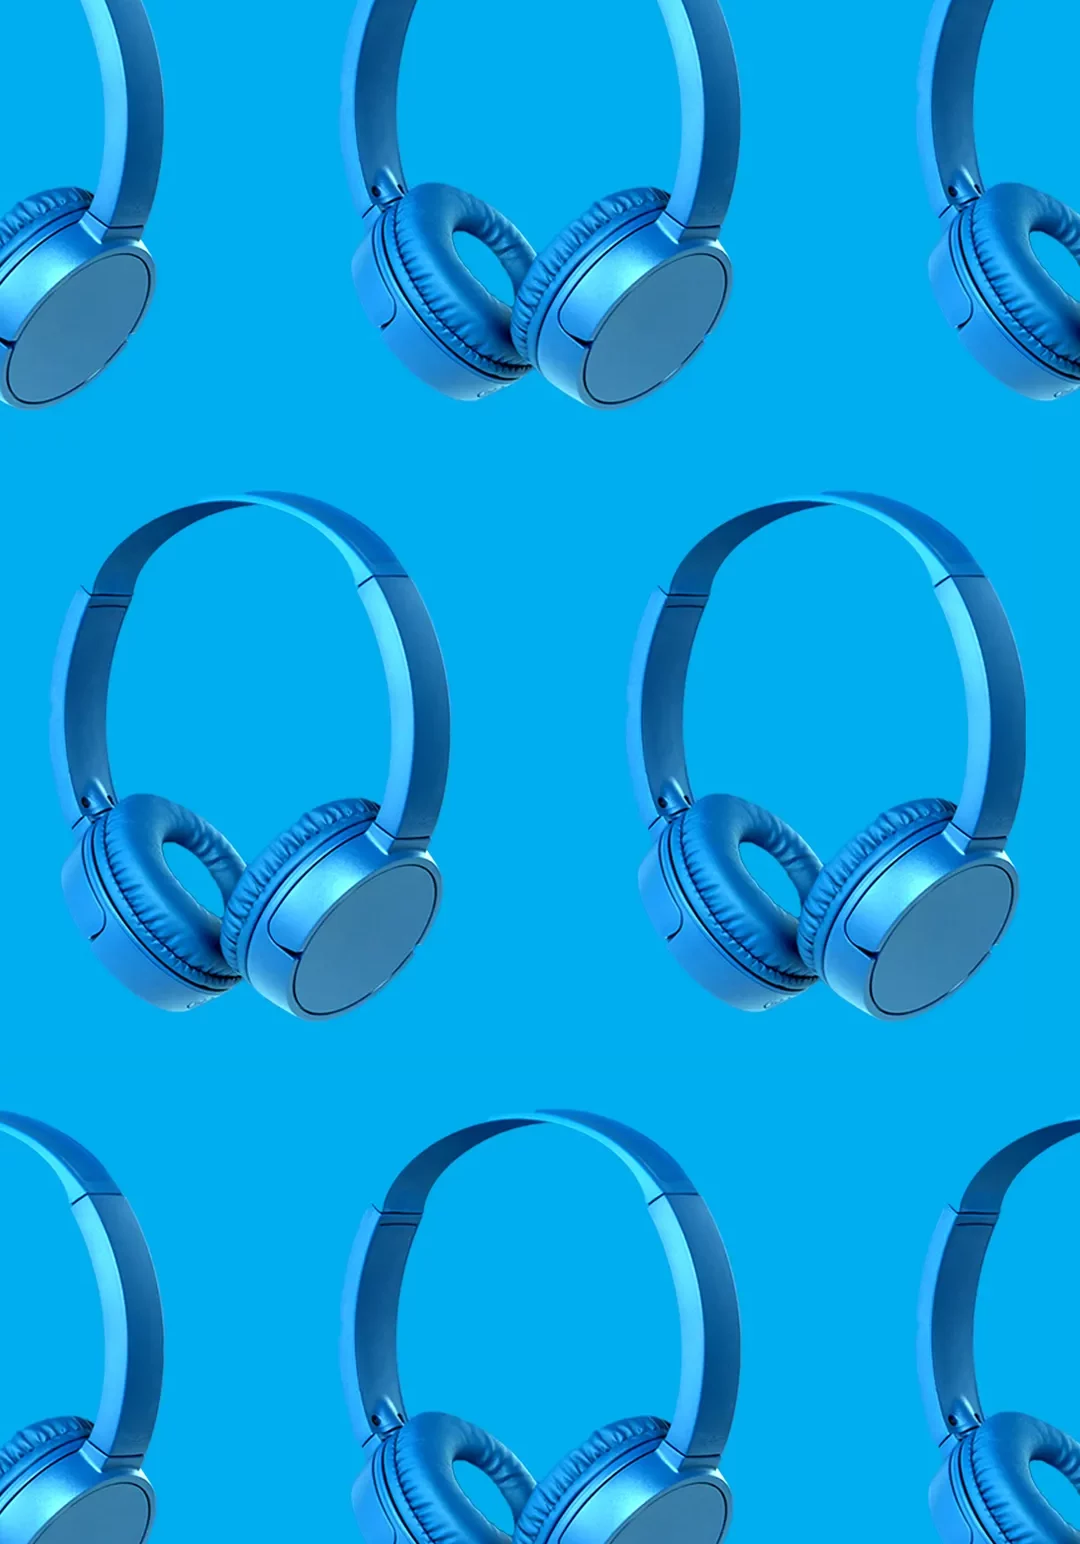 Repeating Images of Headphones - Side Image